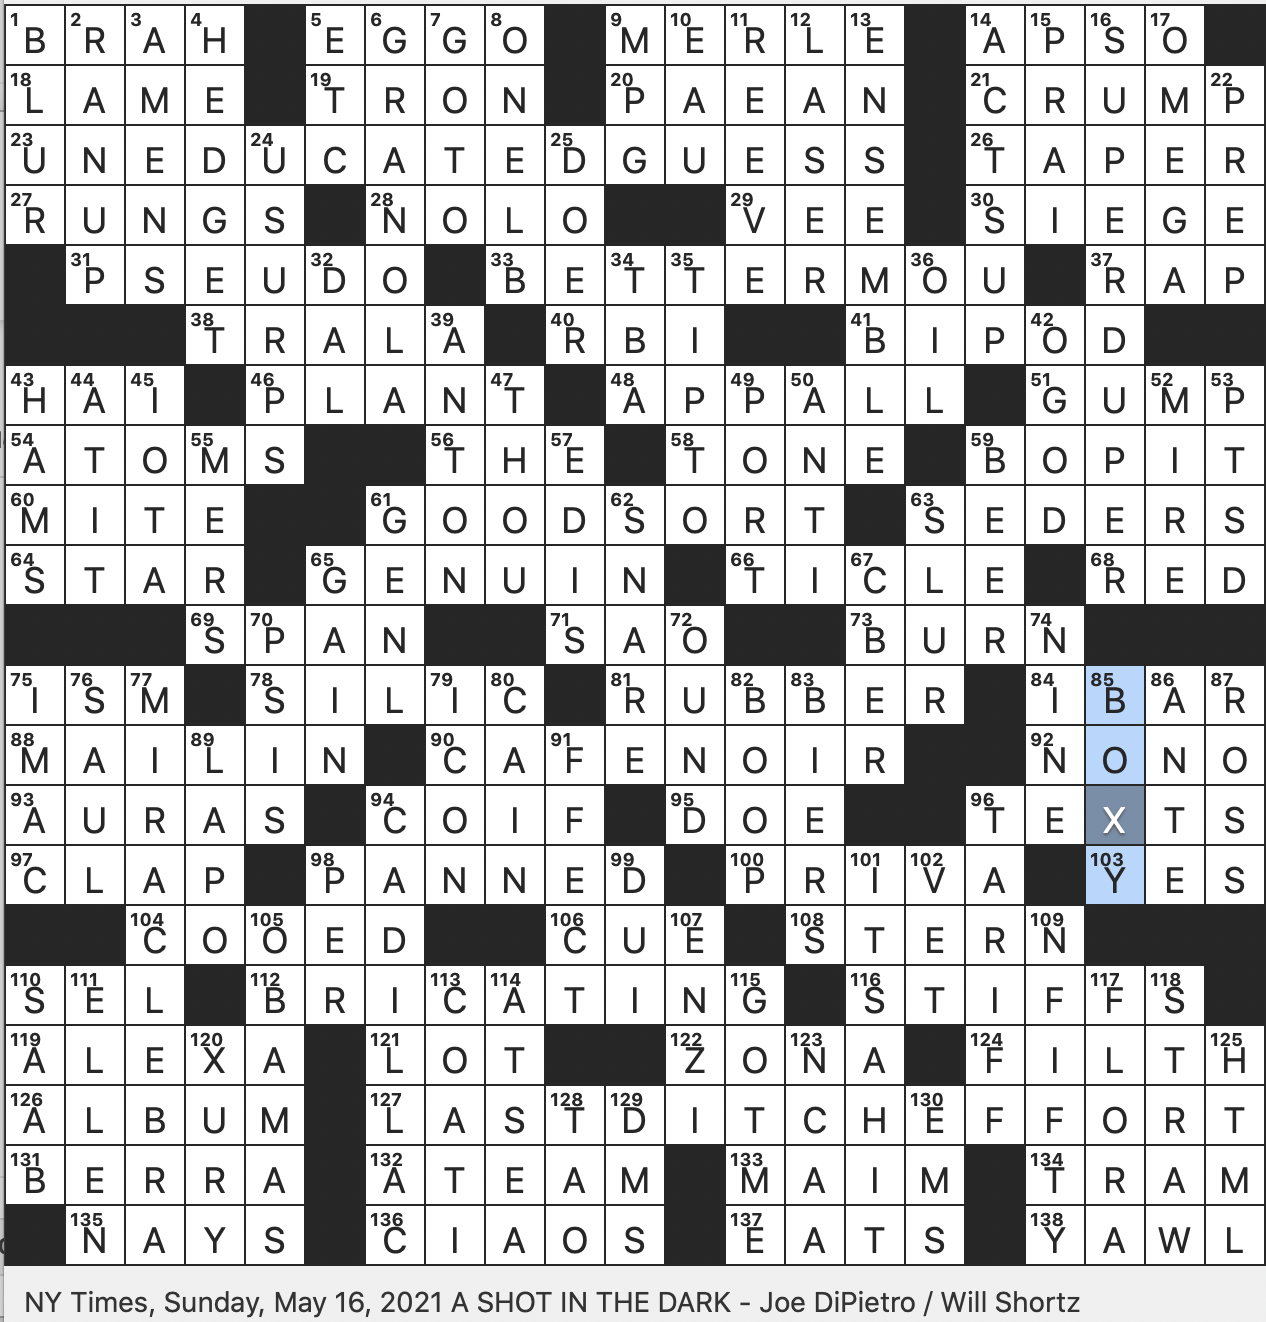 Rex Parker Does The Nyt Crossword Puzzle Loud Thudding Sound Sun 5 16 21 Two Legged Stand Highly Resistant Elastomer Breakfast Drink Sans Creamer Nickname For The Wildcats Of The